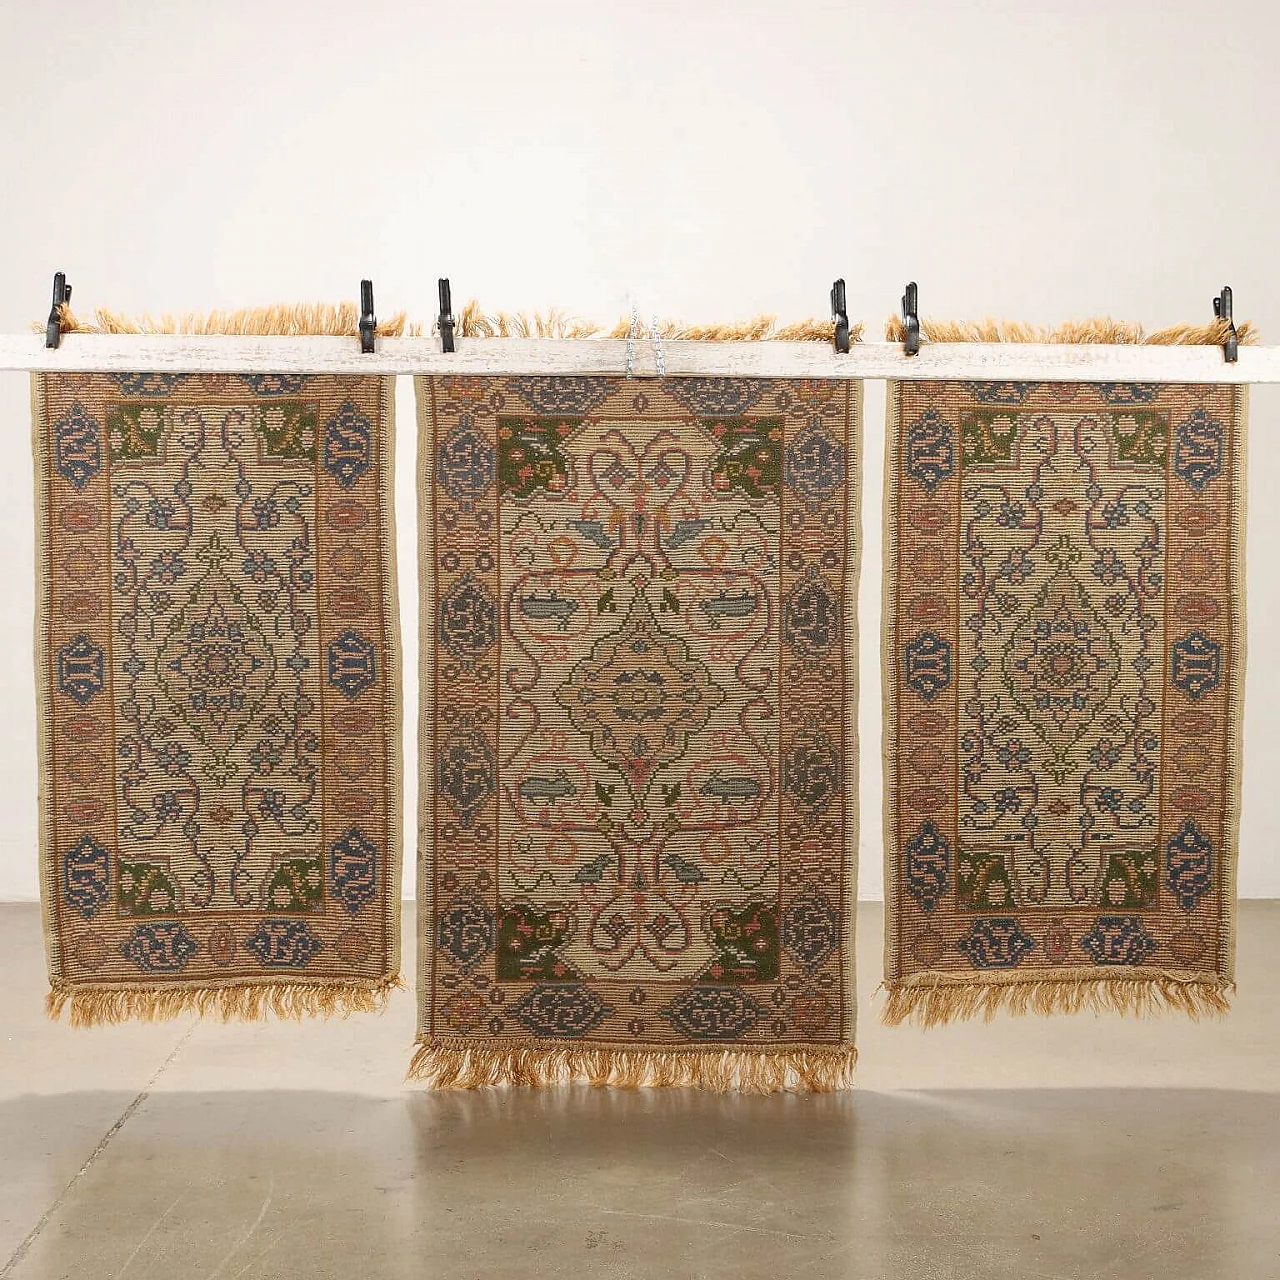 3 Moroccan cotton and wool Marrakech rugs 8